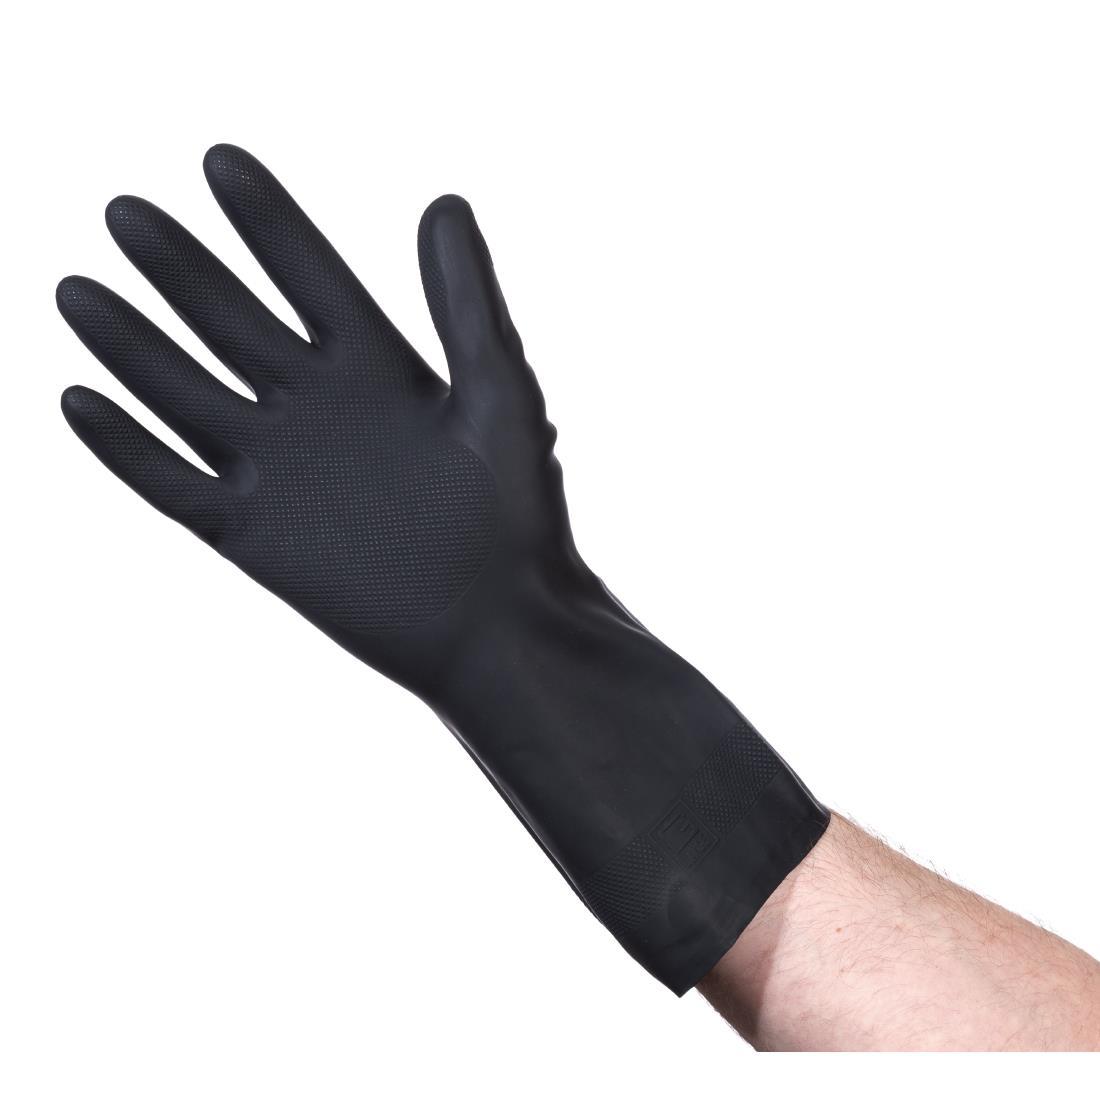 MAPA Cleaning and Maintenance Glove L - F954-L  - 1